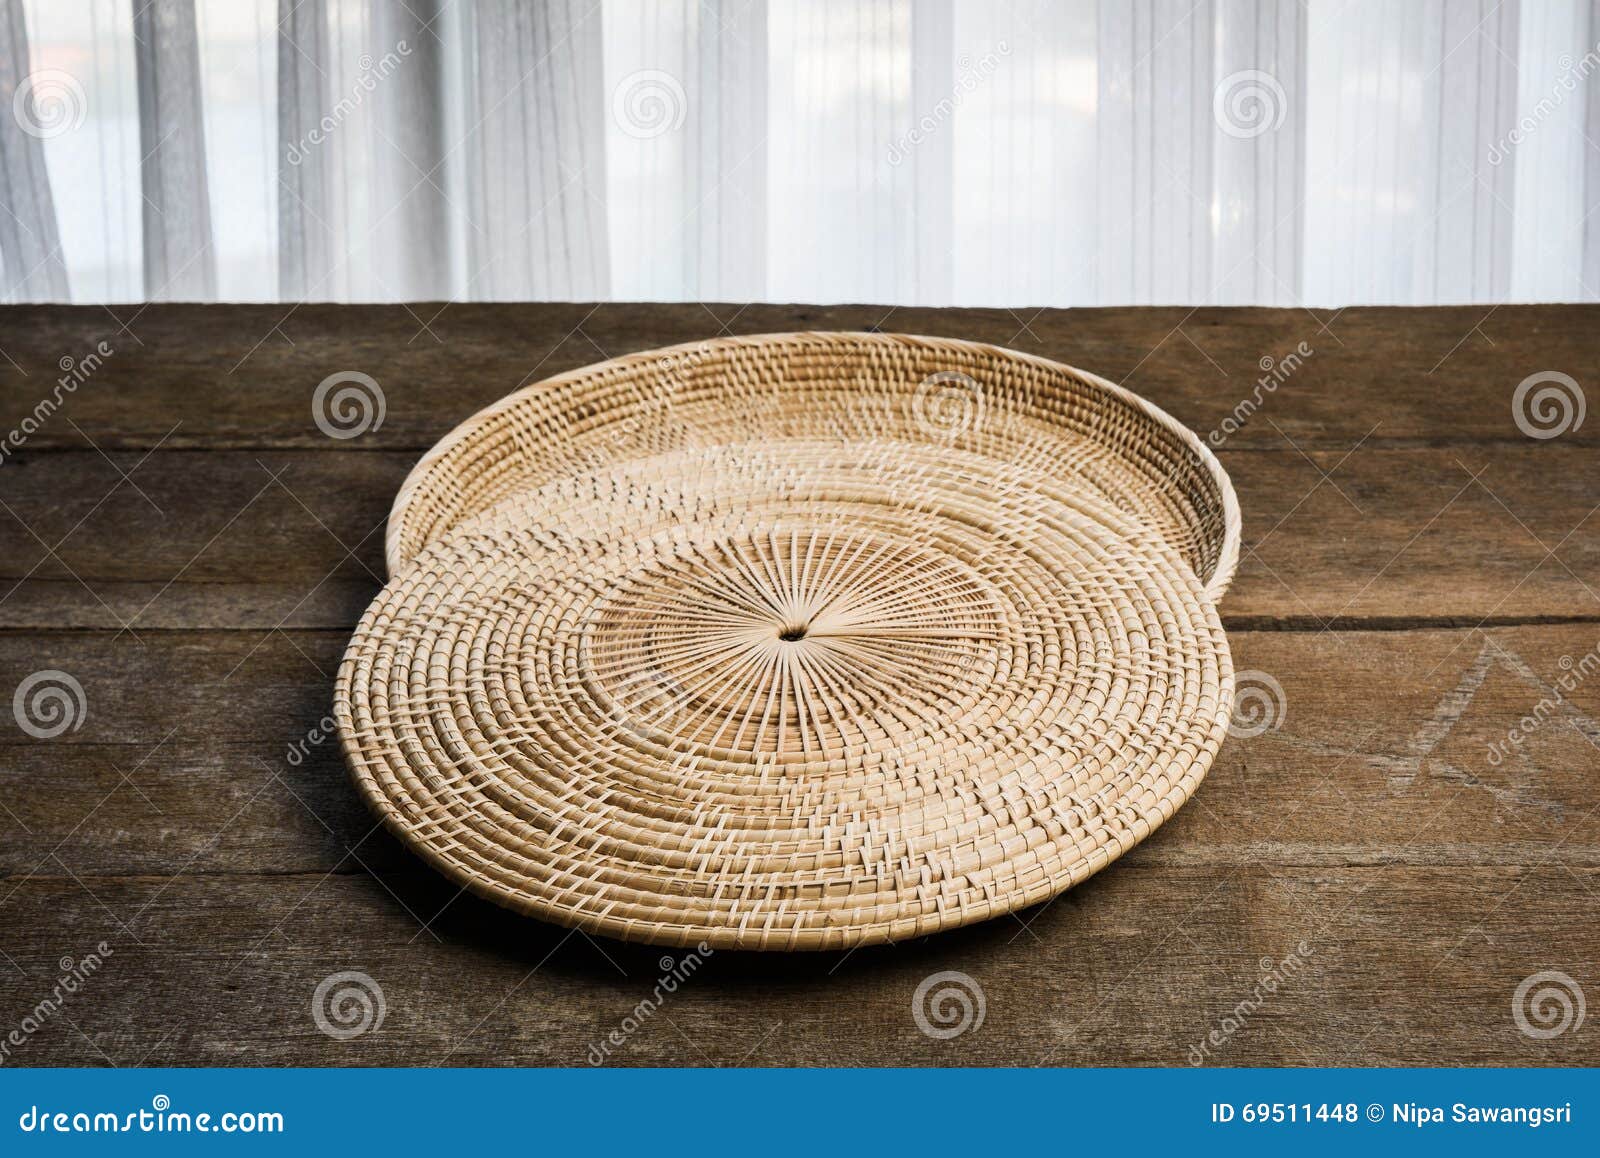 Wicker Placemat on Bamboo Placemats Stock Photo - of traditional, table: 69511448